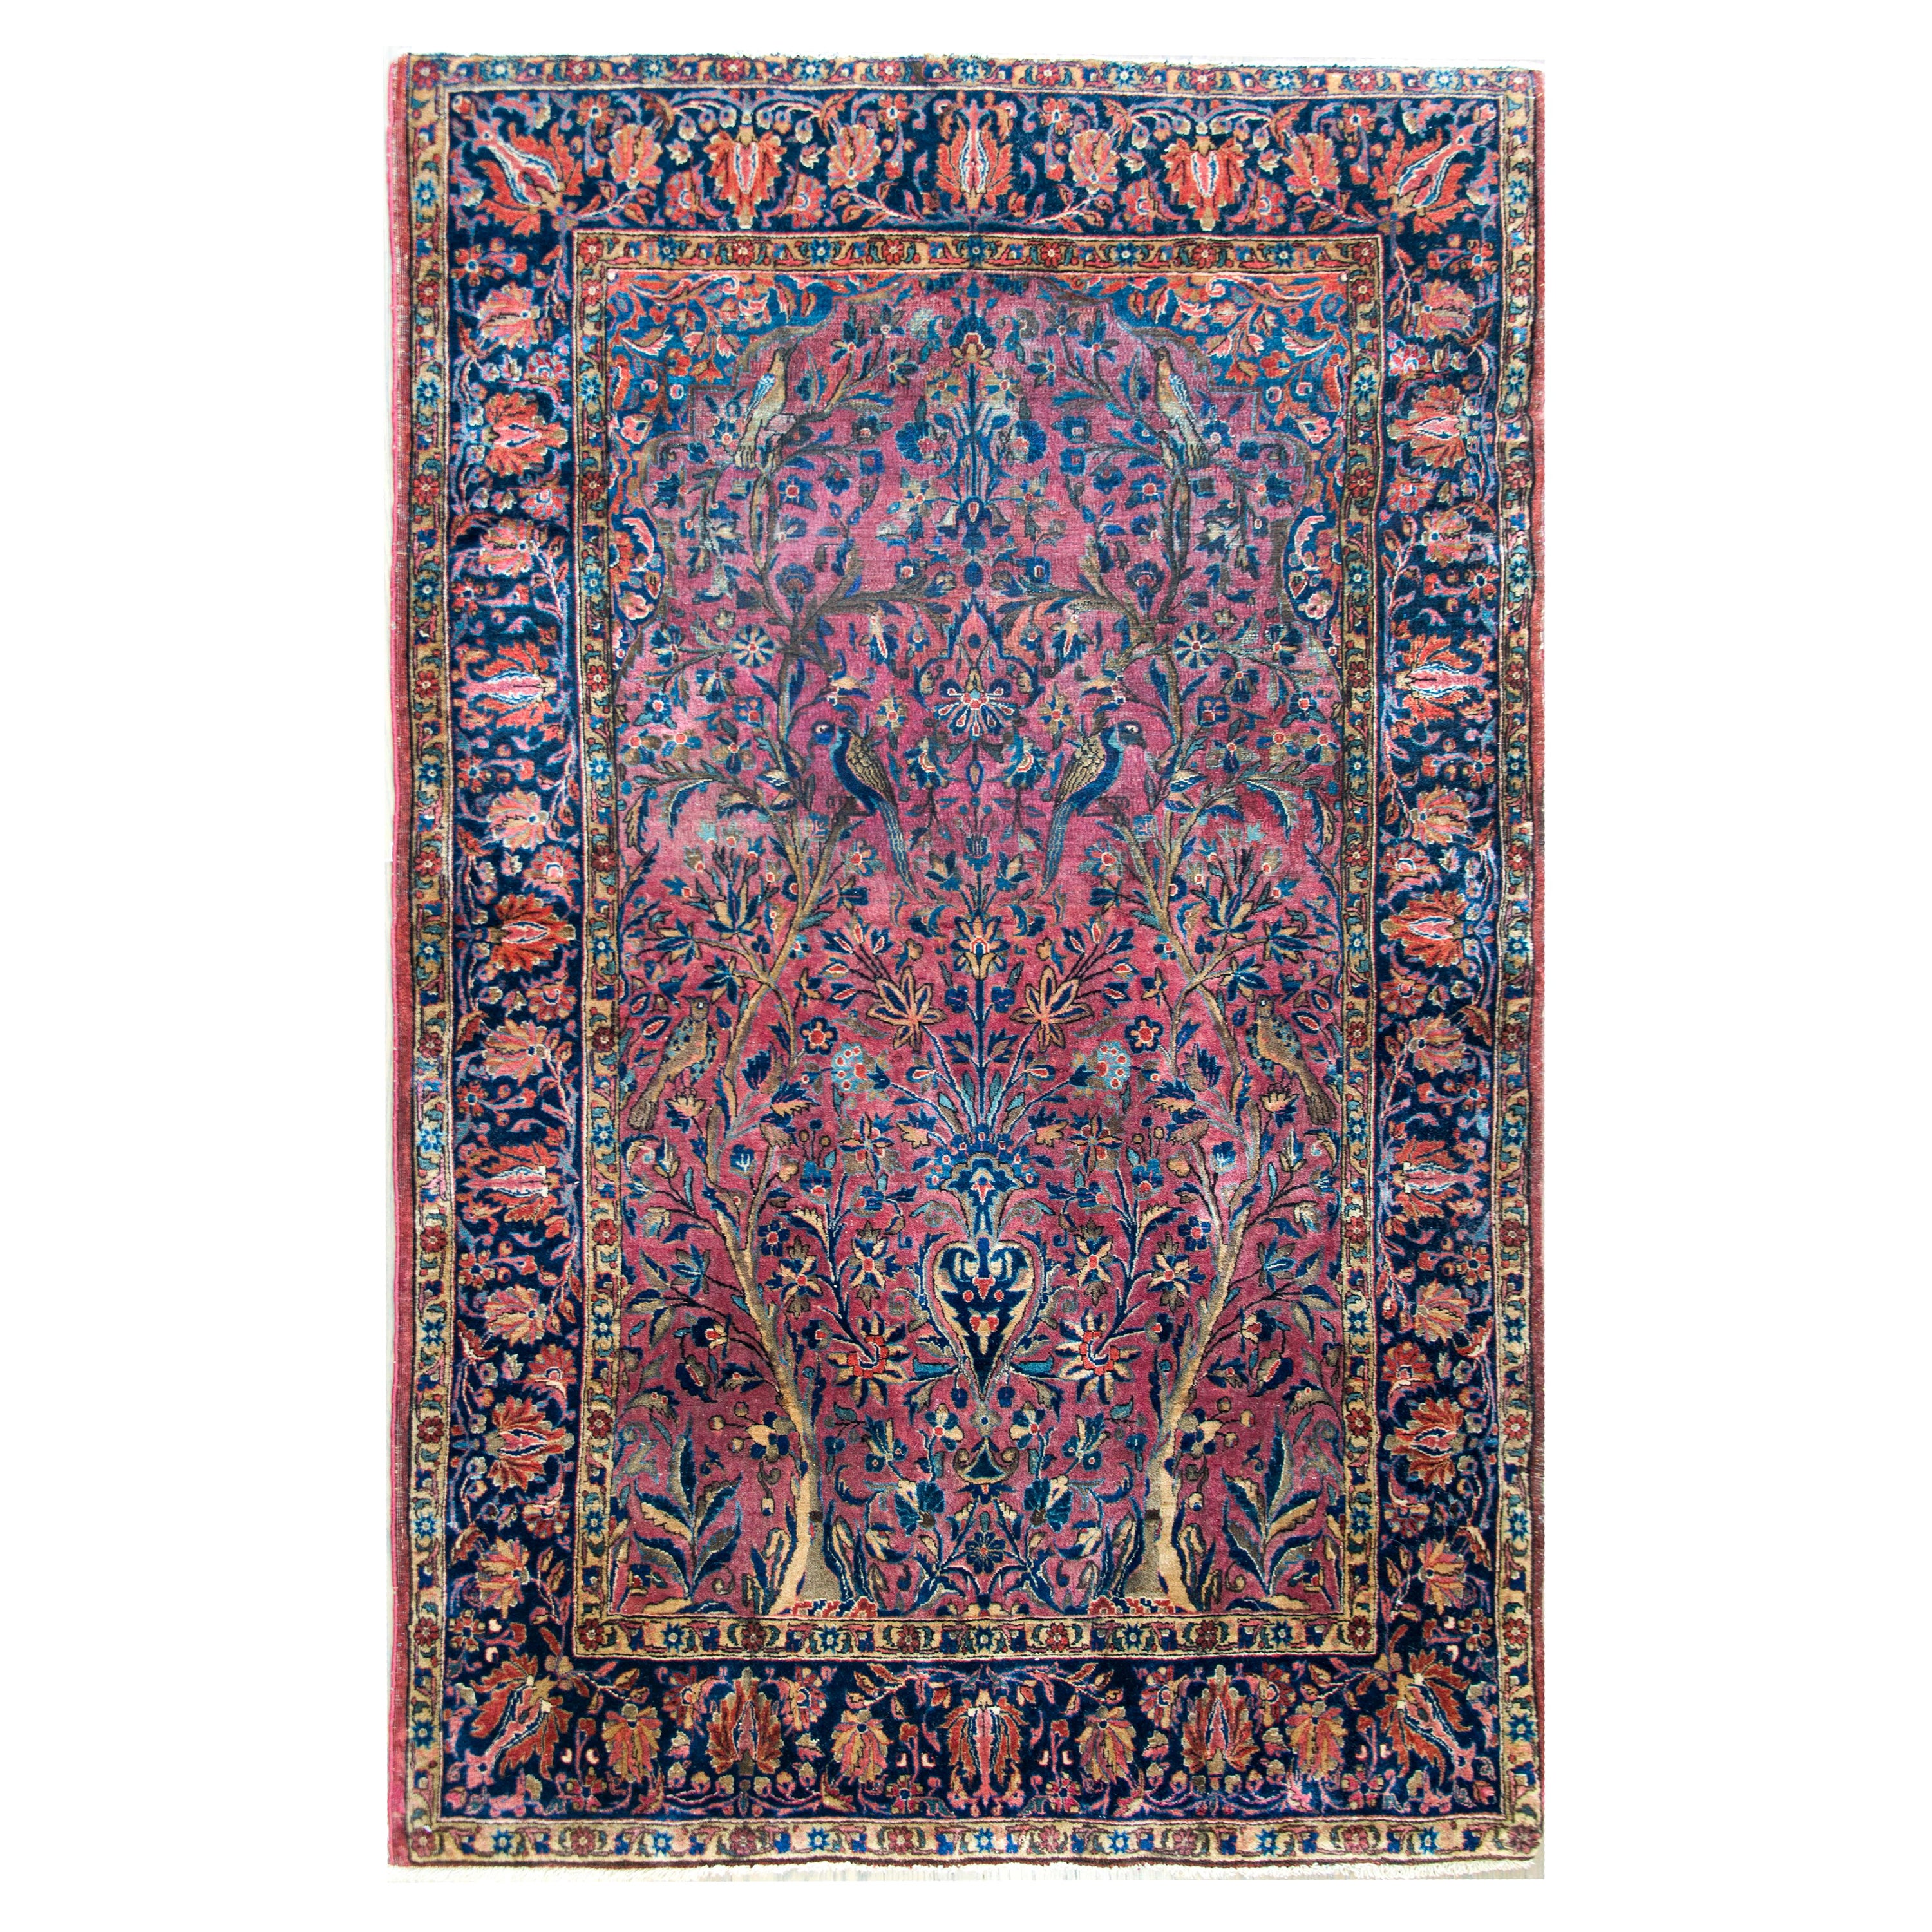 Late 19th Century Persian Double Tree-of-Life Kashan Rug